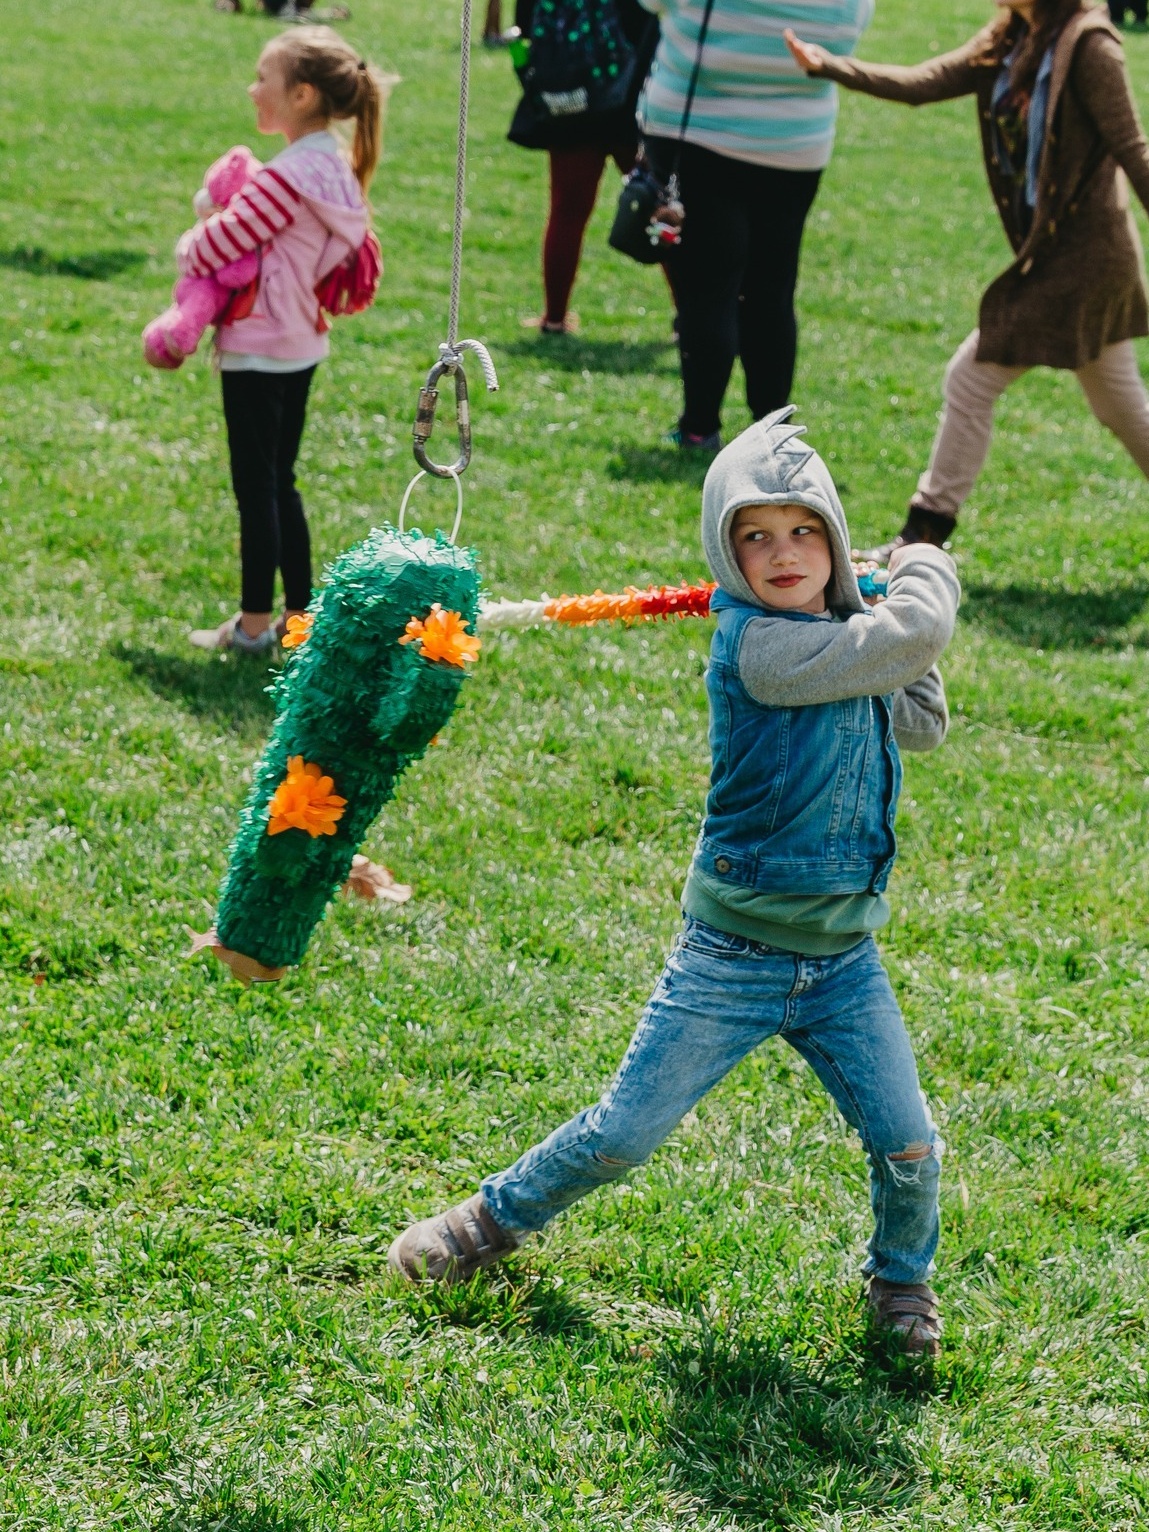 A child in a hooded sweatshirt prepares to swing a stick at a pinata